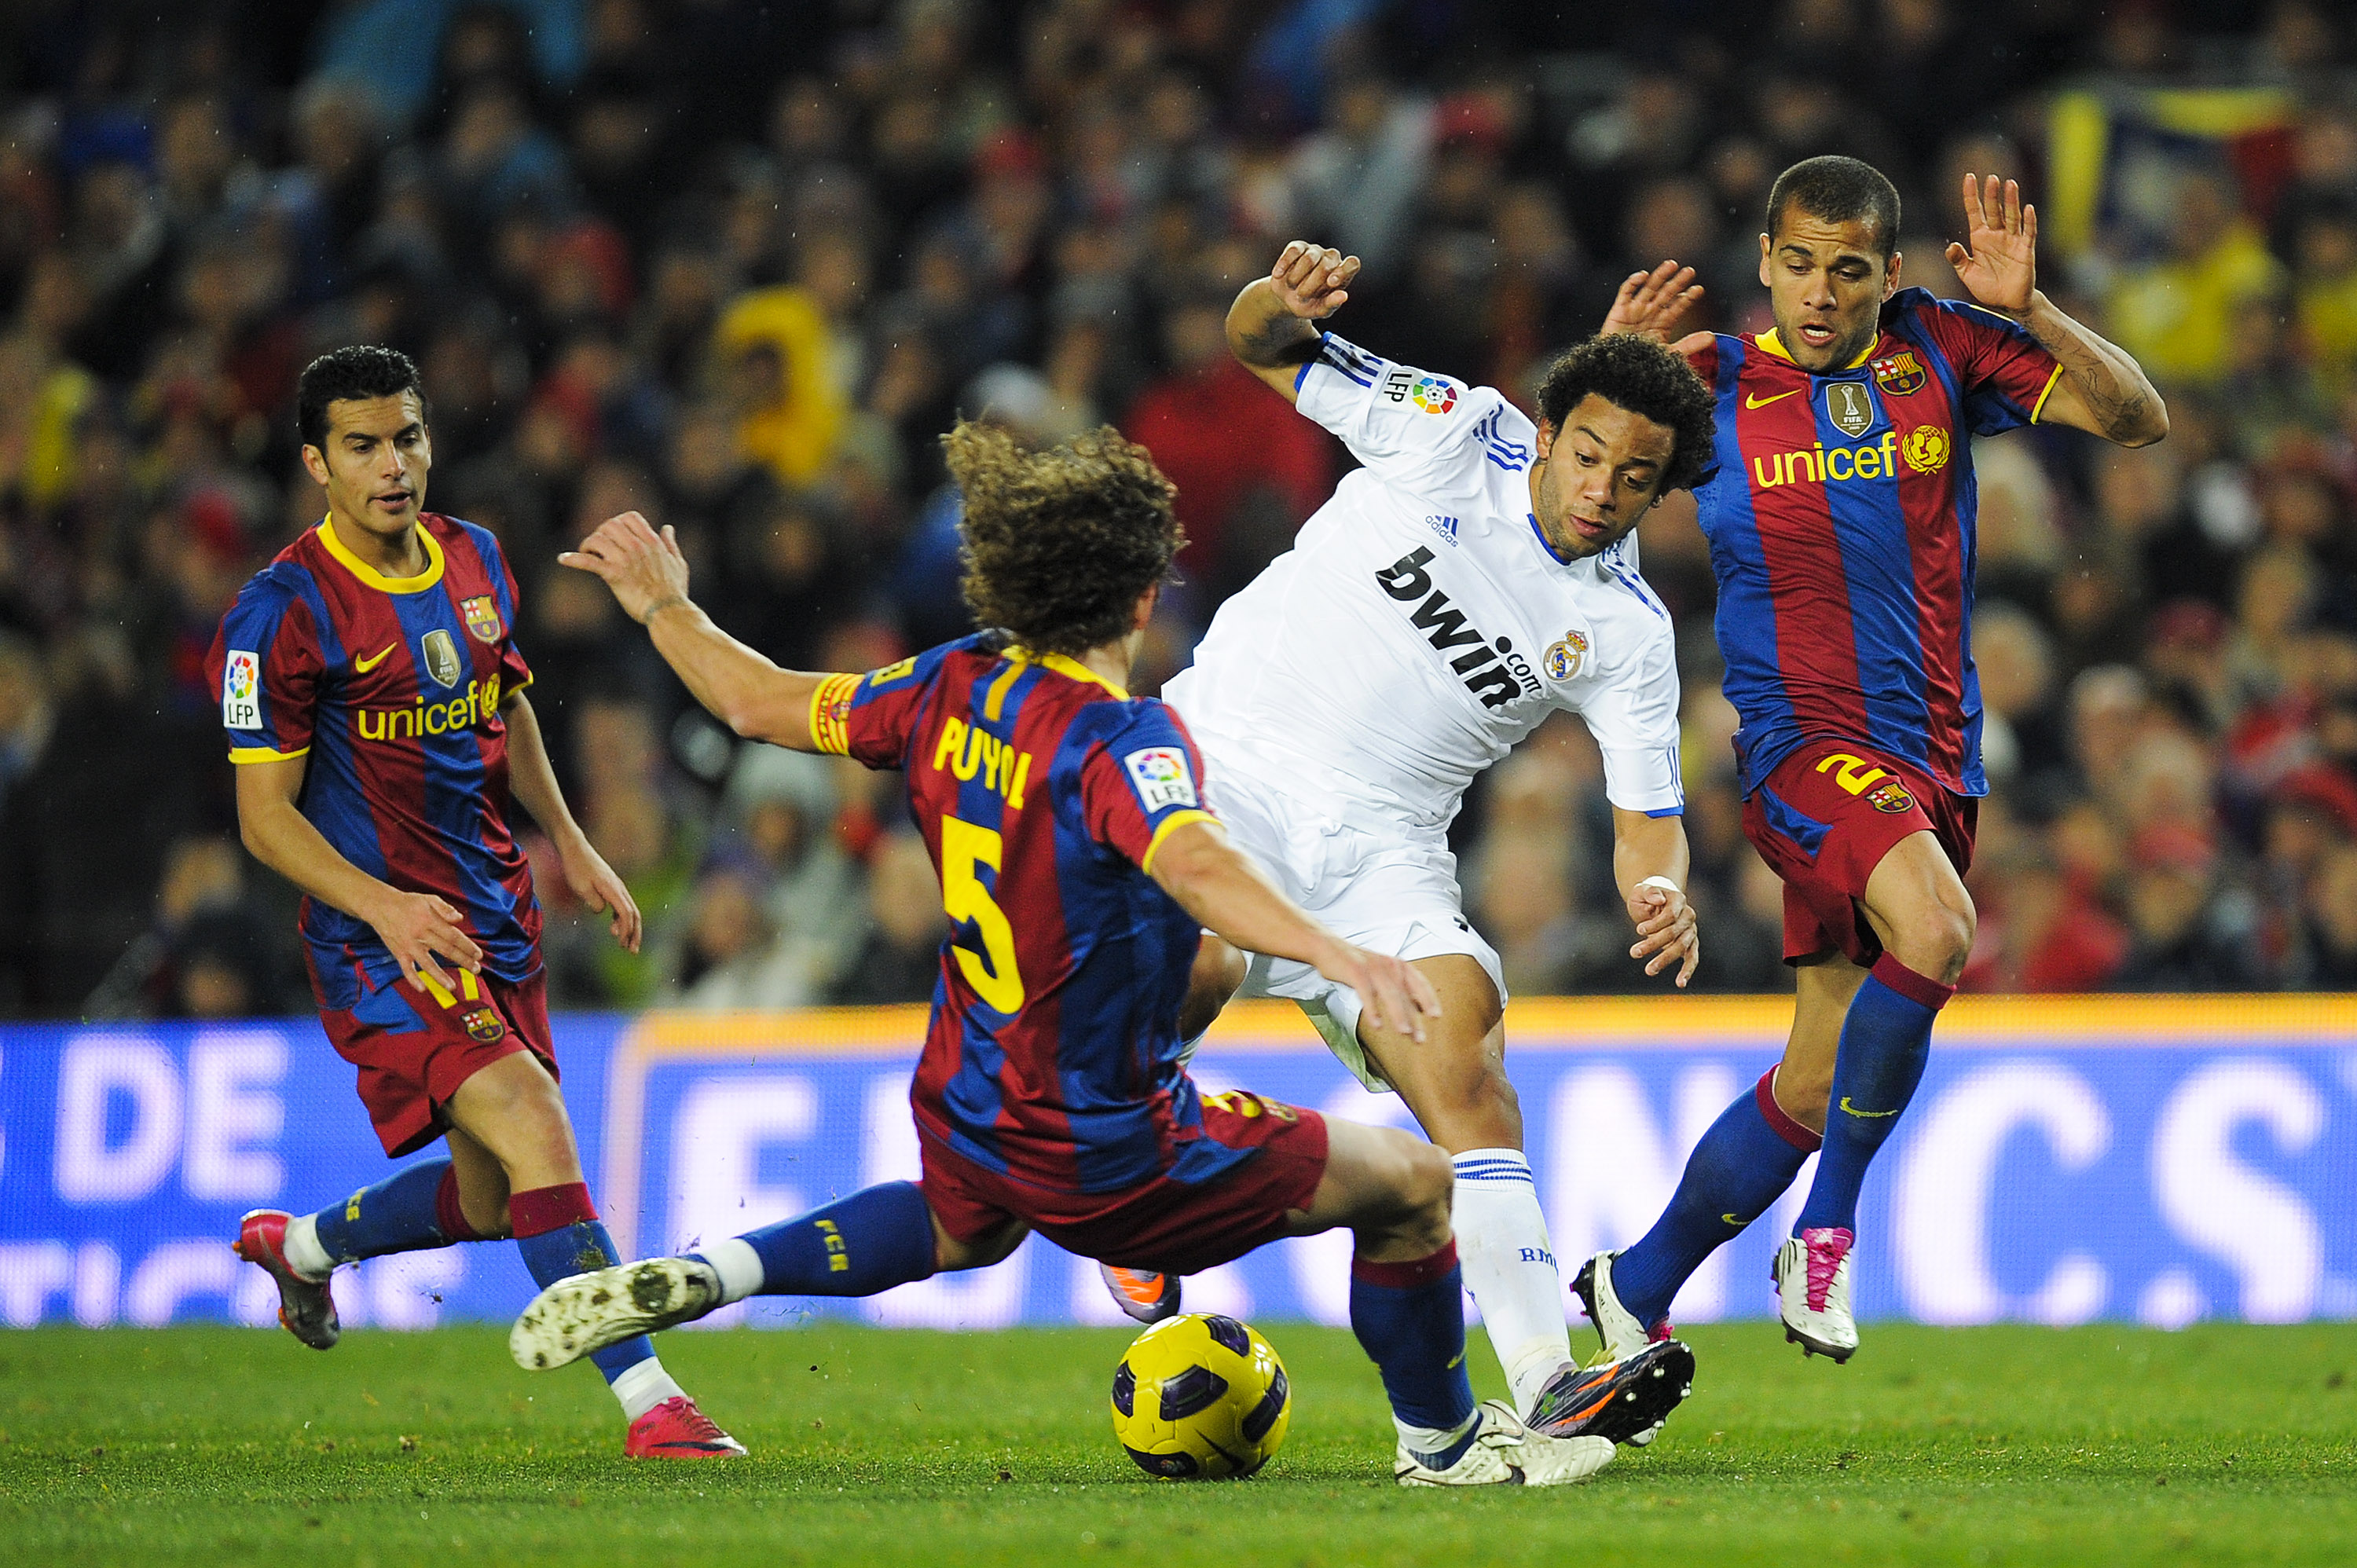 BARCELONA, SPAIN - NOVEMBER 29:  Marcelo Vieira of Real Madrid (2ndR) vies for the ball against Carles Puyol (2ndL) and Dani Alves (R) of Barcelona during the La Liga match between Barcelona and Real Madrid at the Camp Nou Stadium on November 29, 2010 in